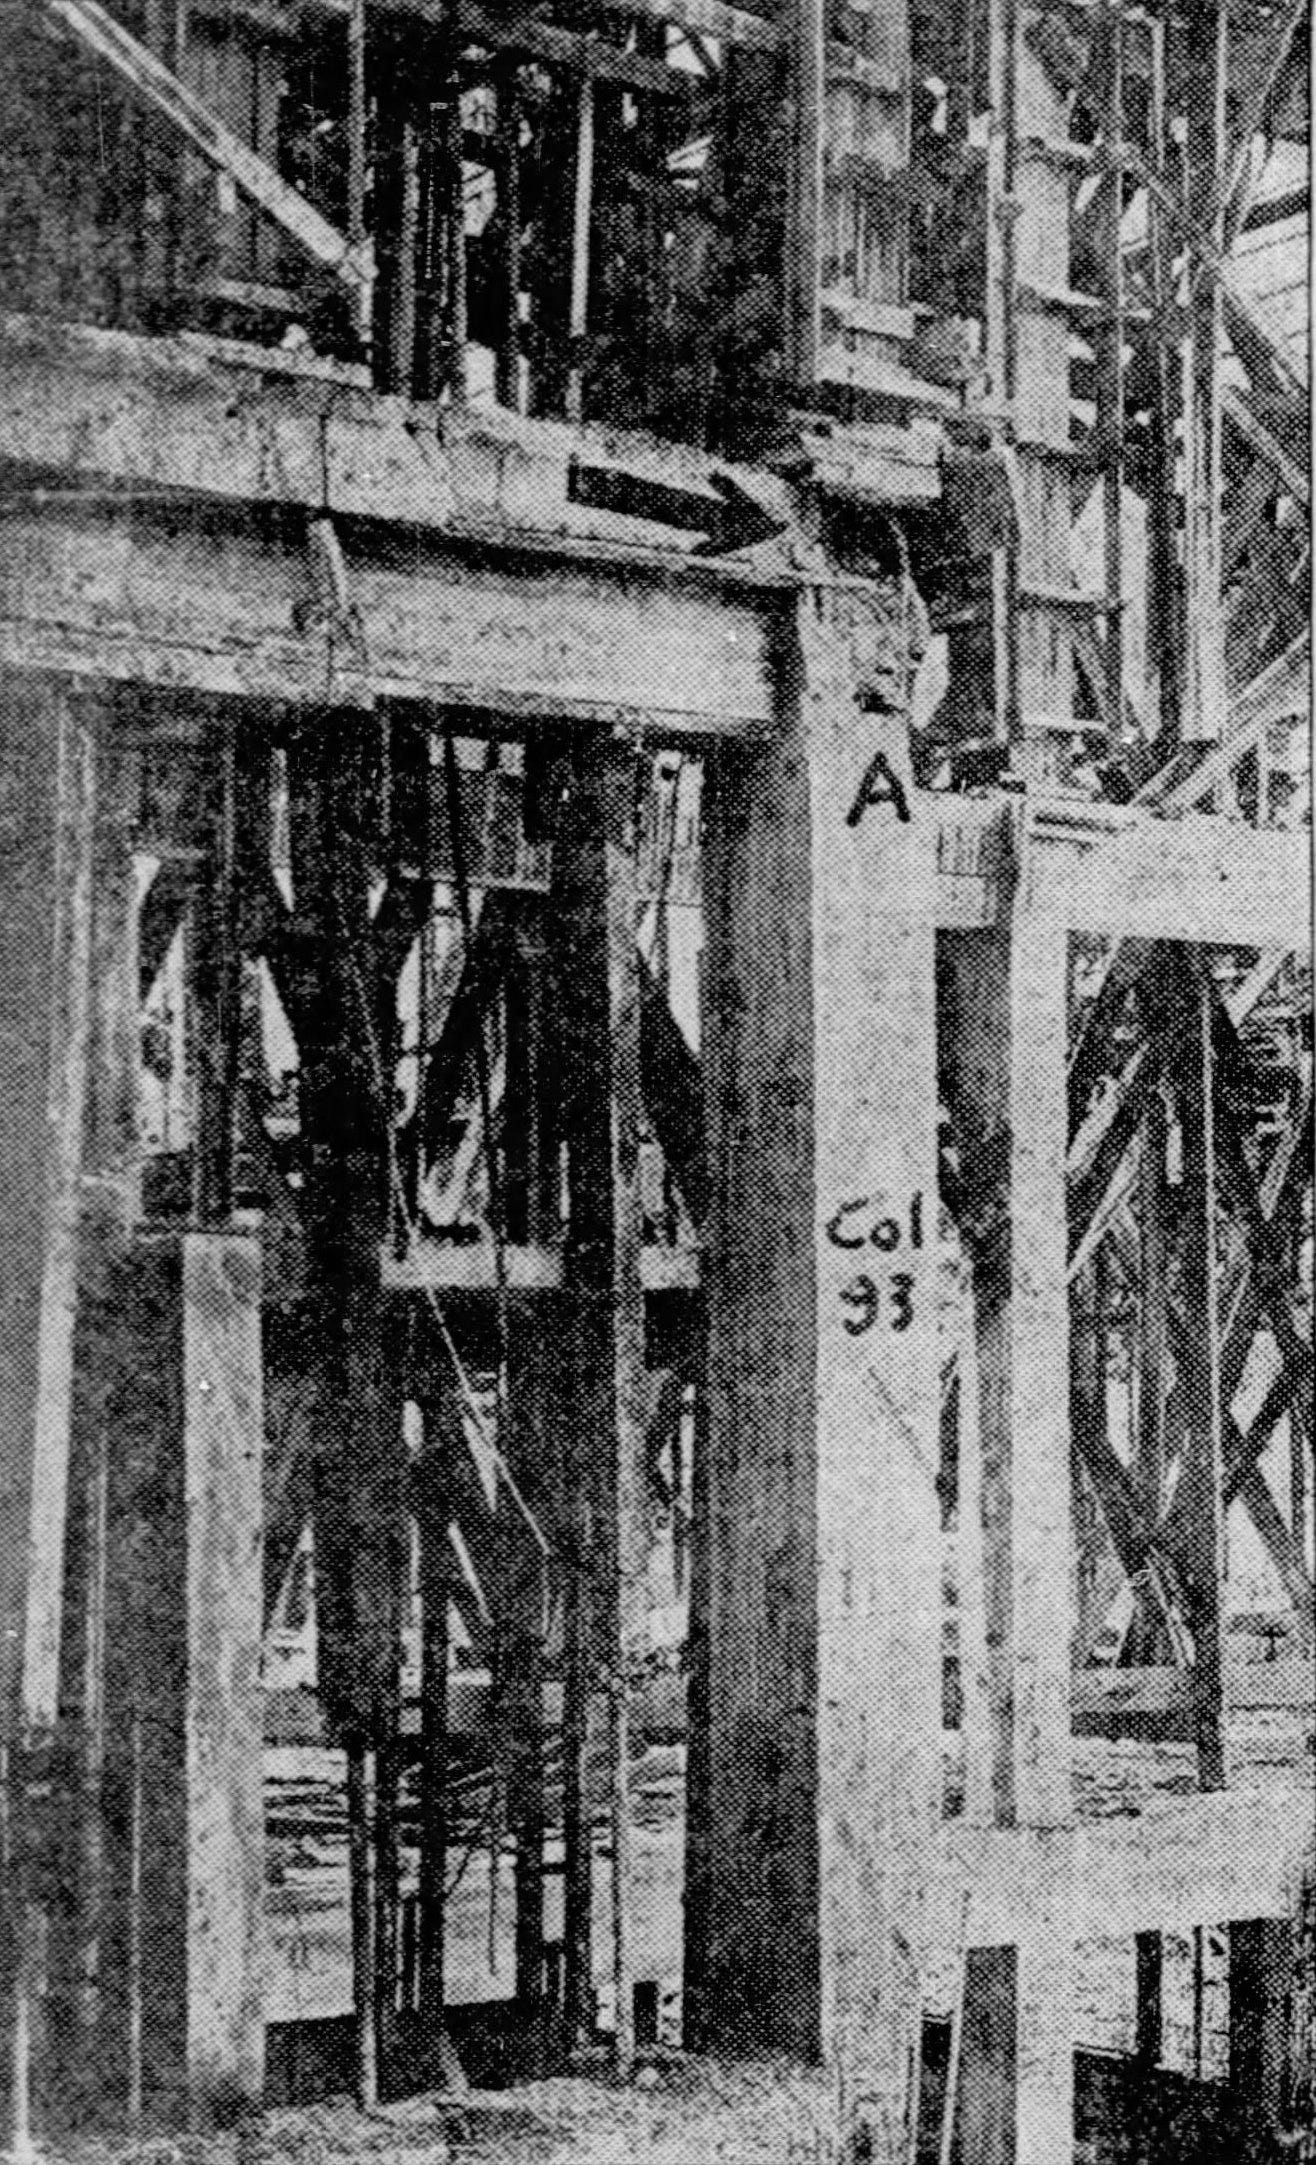 Figure 3: Photo published in the Miami Herald on July 7, 1926, of the support beam that failed causing the collapse